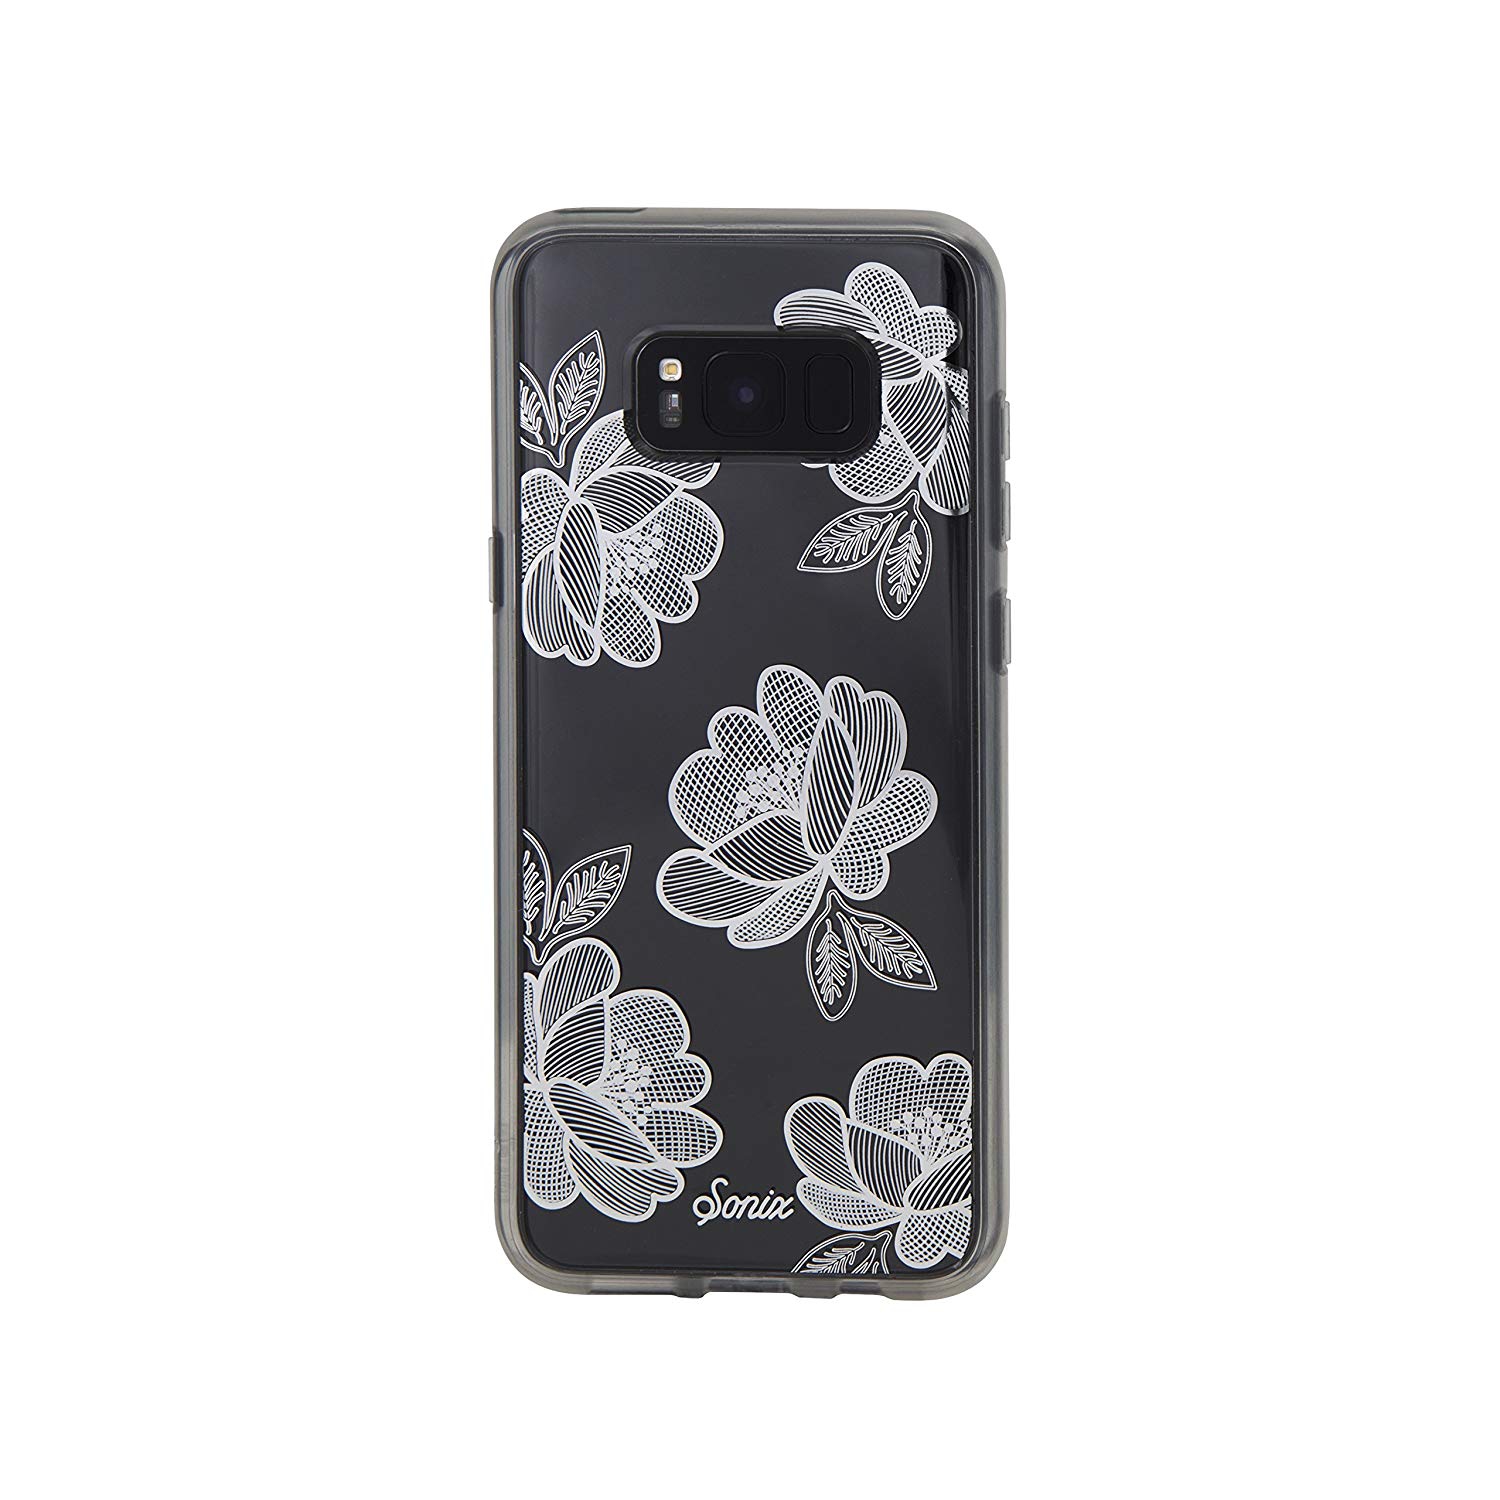 Sonix Cell Phone Case for Samsung Galaxy S8 Plus - Silver Florette